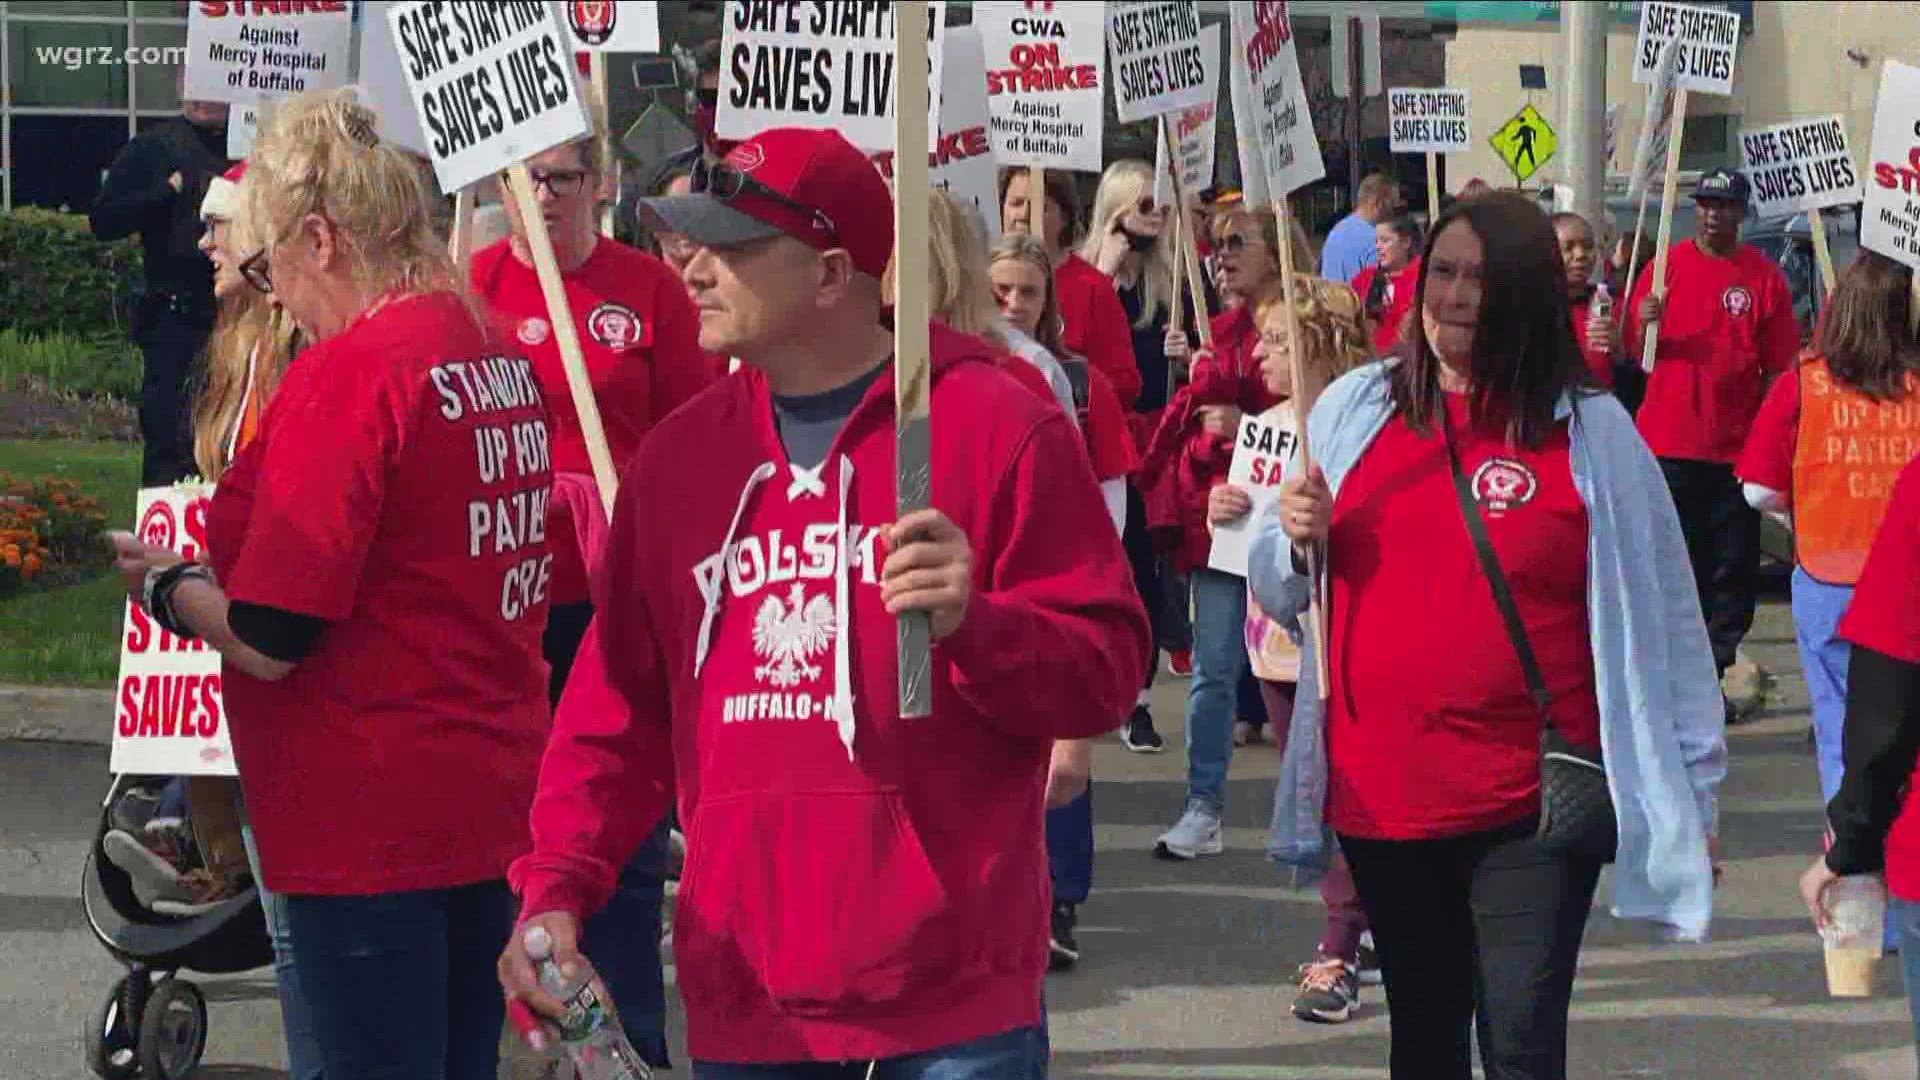 We have hit the one-week mark for the strike at South Buffalo Mercy Hospital with both Catholic Health and the C.W.A. still trying to reach a deal.